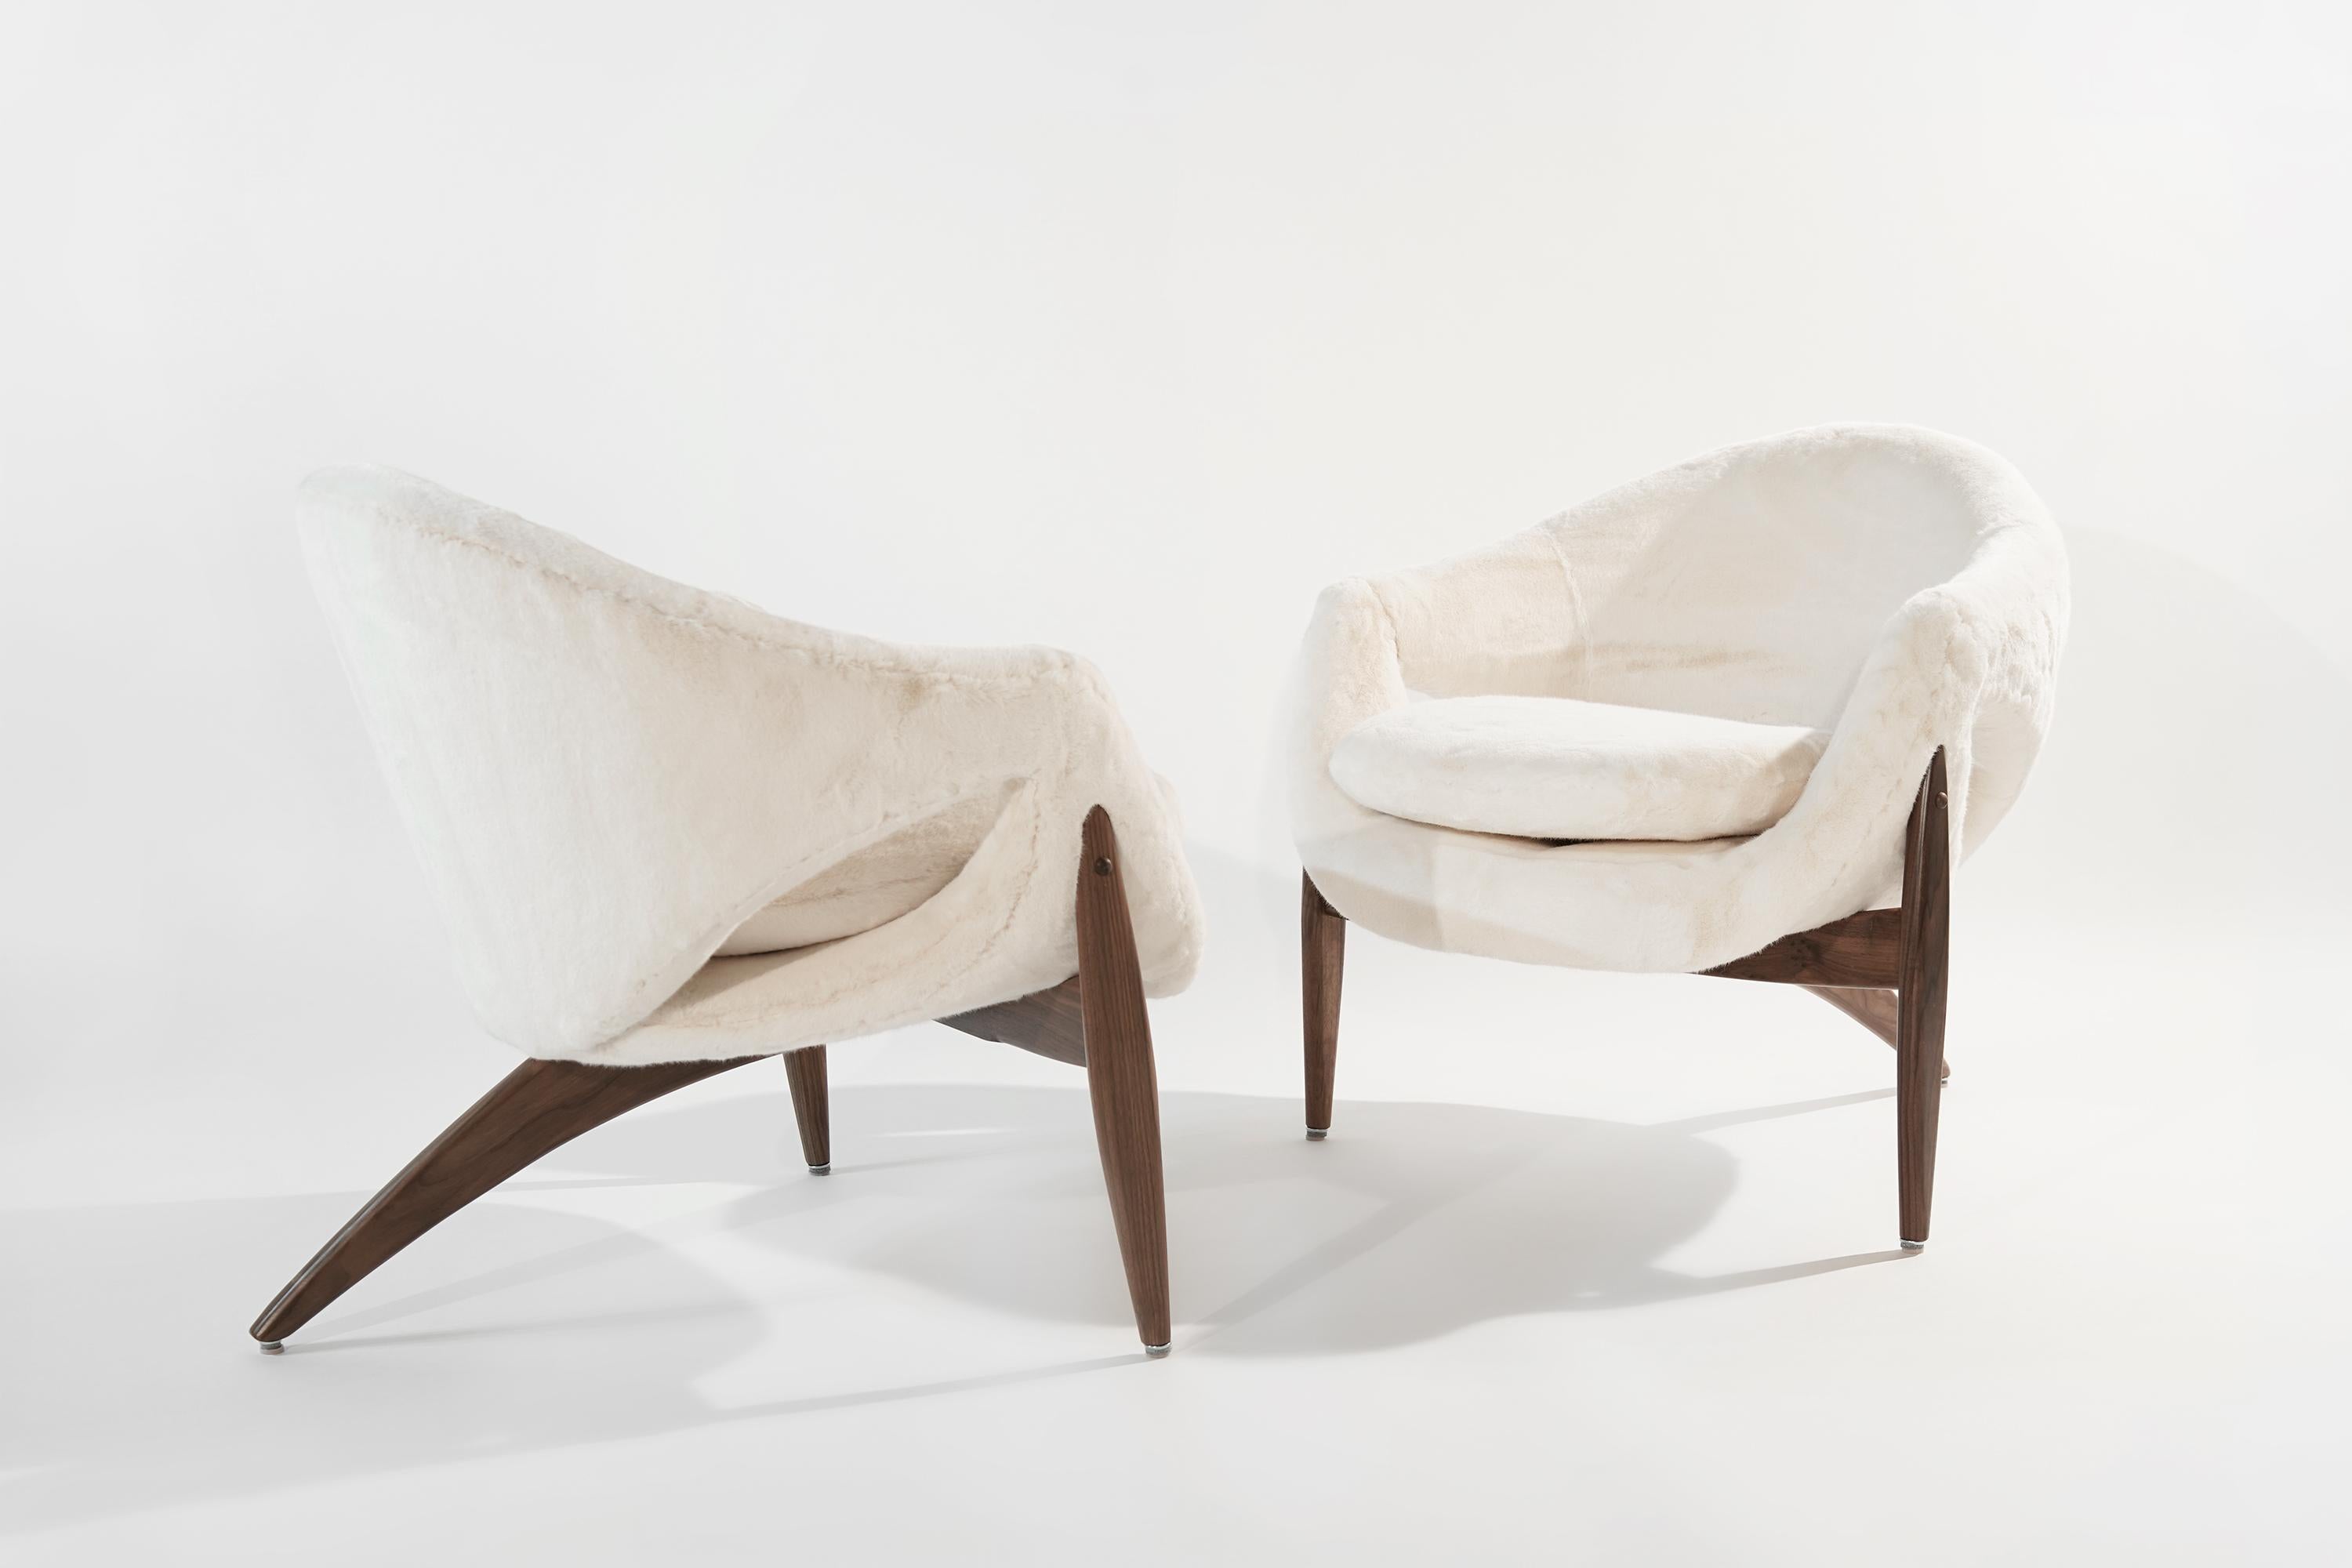 Rare seating set designed by Italy-born furniture designer Luigi Tiengo and produced by the Canadian manufacturer Cimon in Montréal, circa 1963. Fully restored sculptural frames executed in walnut, newly upholstered in off-white faux fur. Striking